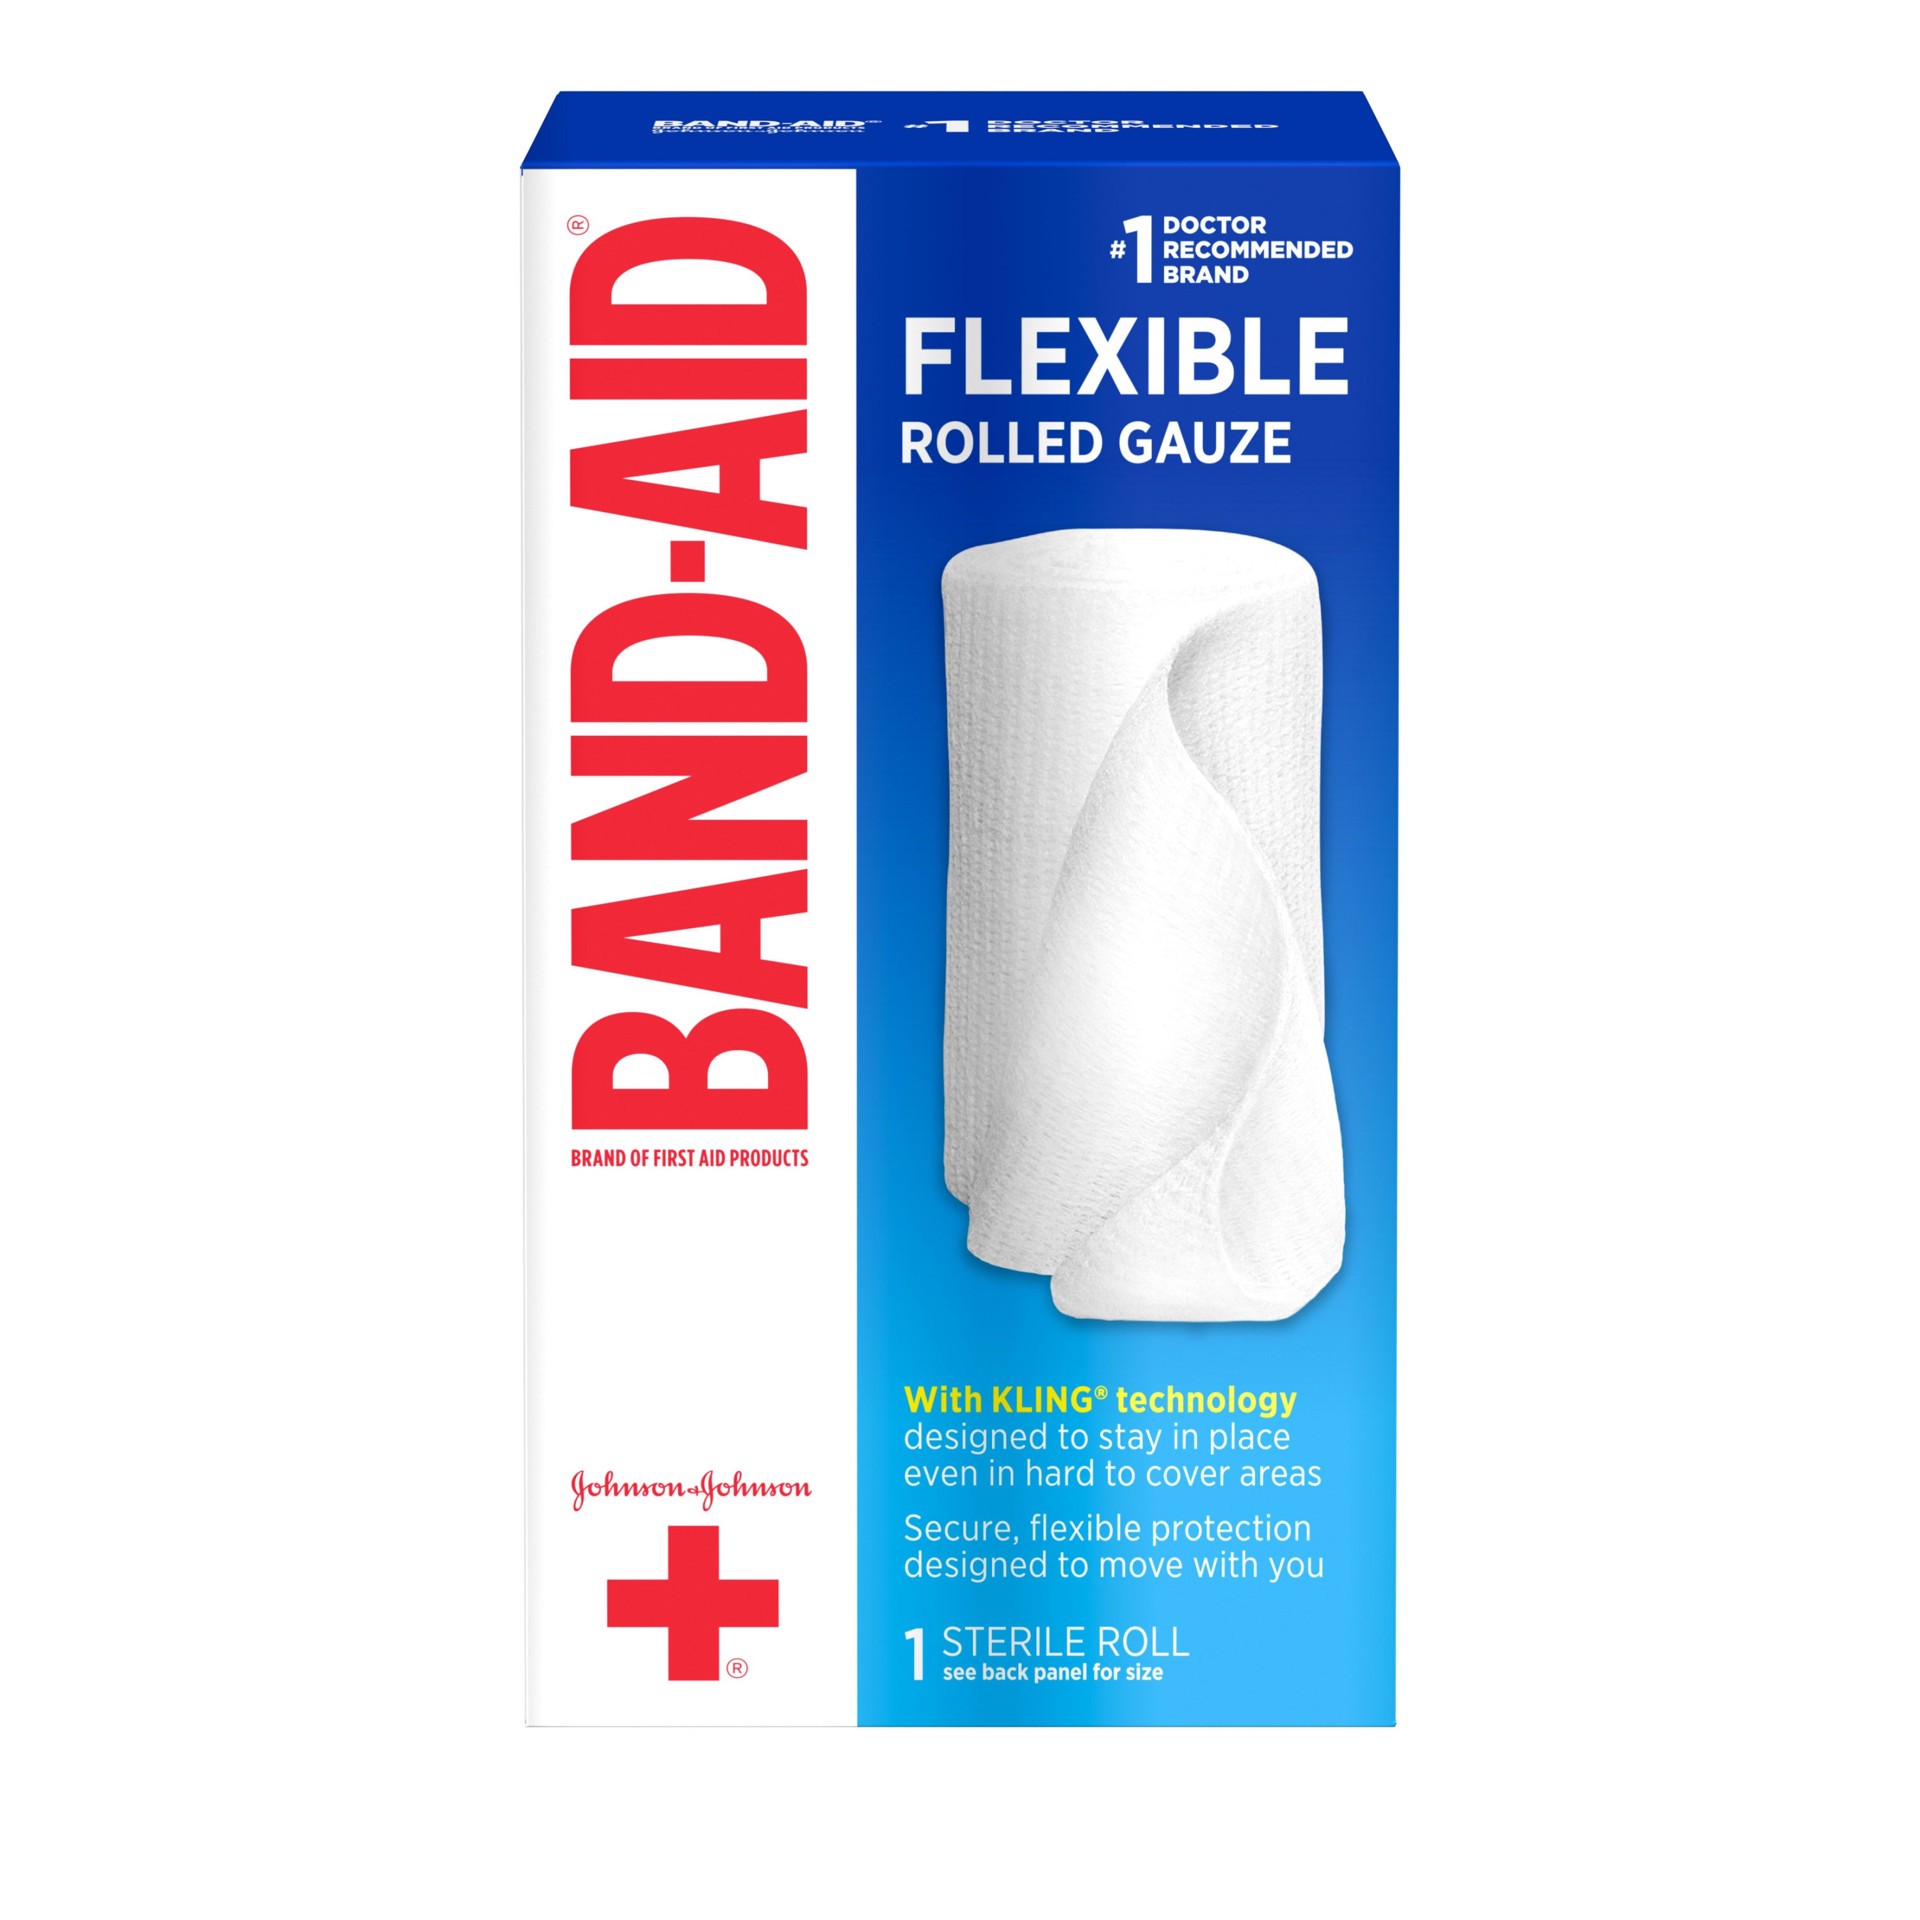 slide 2 of 5, BAND-AID Band Aid Brand of First Aid Products Flexible Rolled Gauze Dressing for Minor Wound Care, soft Padding and Instant Absorption, 3 Inches by 2.5 Yards, 1 ct